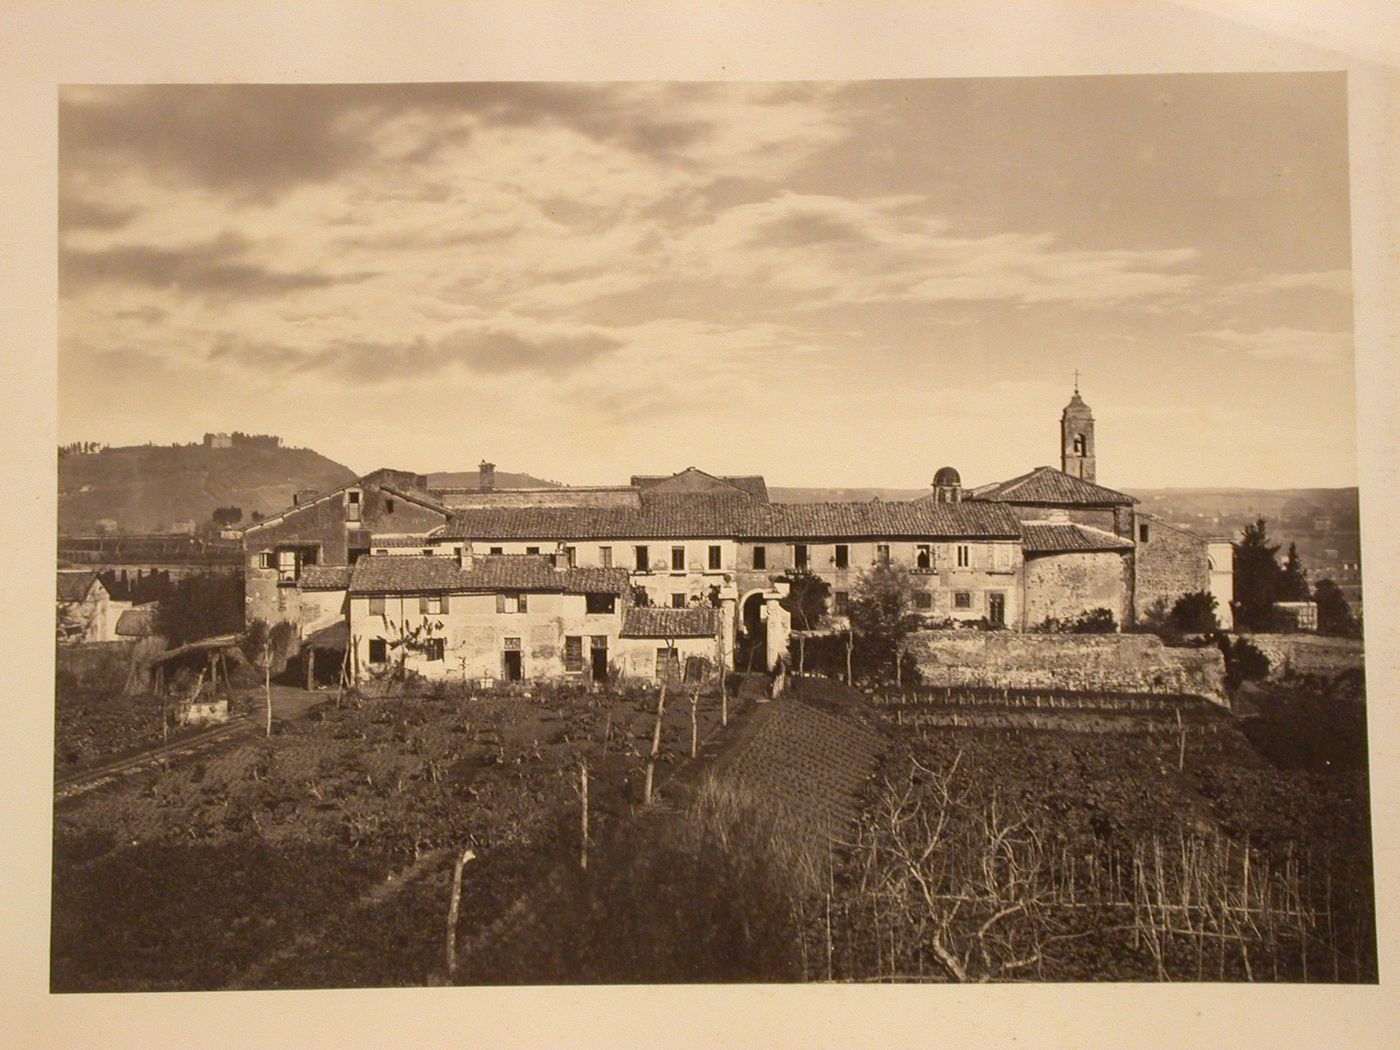 General view of countryside, Rome, Italy